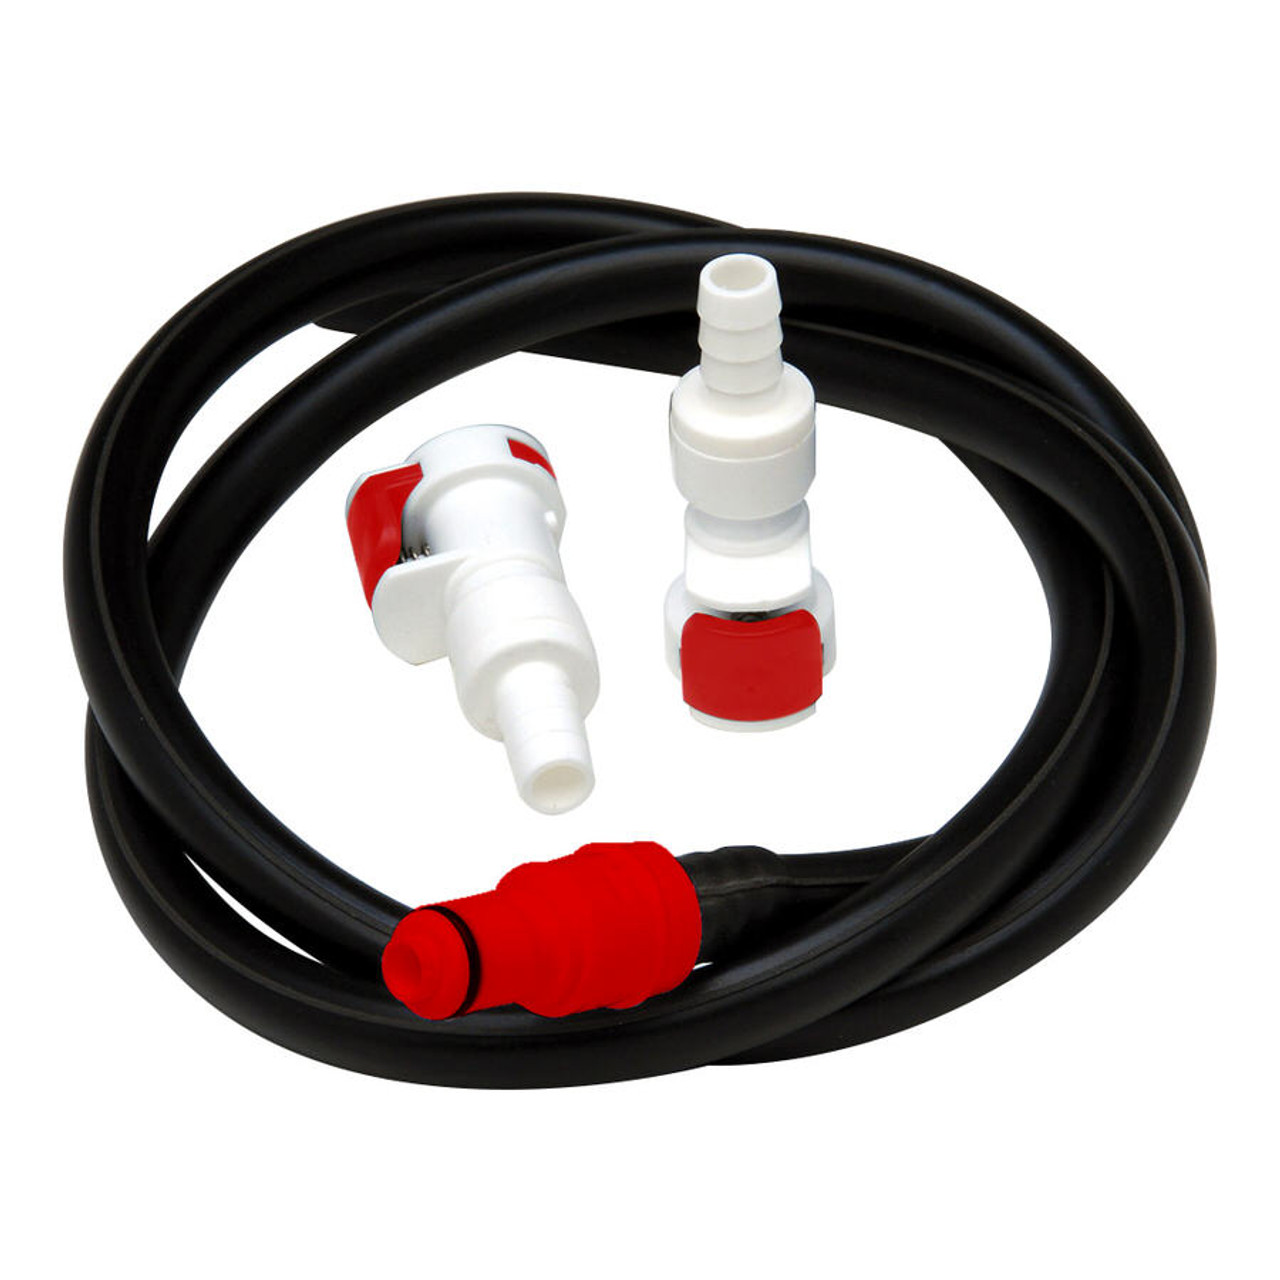 Cool Shirt Drain Kit w/hose and Quick Disconnect Fitting - CST5006-0003